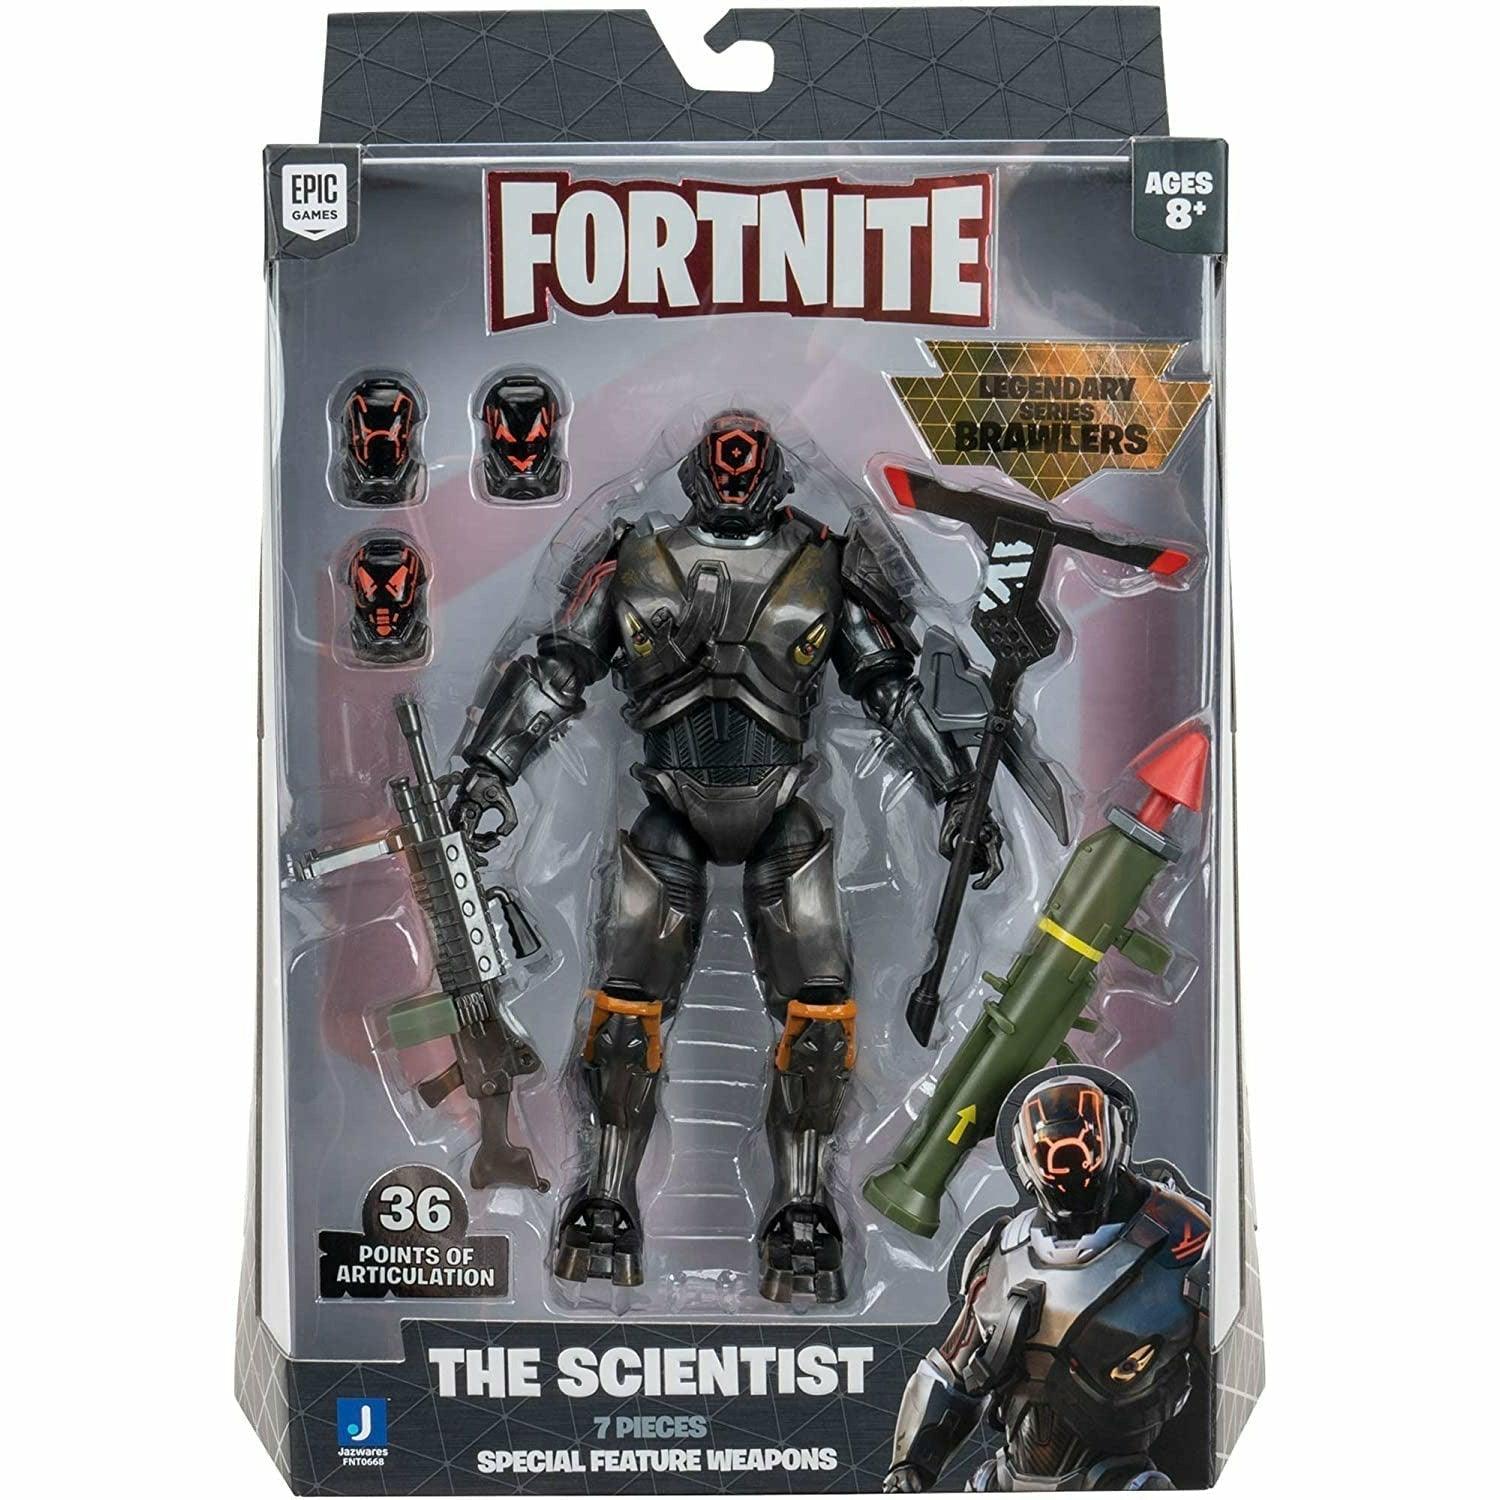 Fortnite Legendary Series Brawlers, 1 Figure Pack - 7 Inch The Scientist Action Figure, Plus Accessories - BumbleToys - 8+ Years, 8-13 Years, Action Battling, Action Figures, Boys, Figures, Fortnite, OXE, Pre-Order